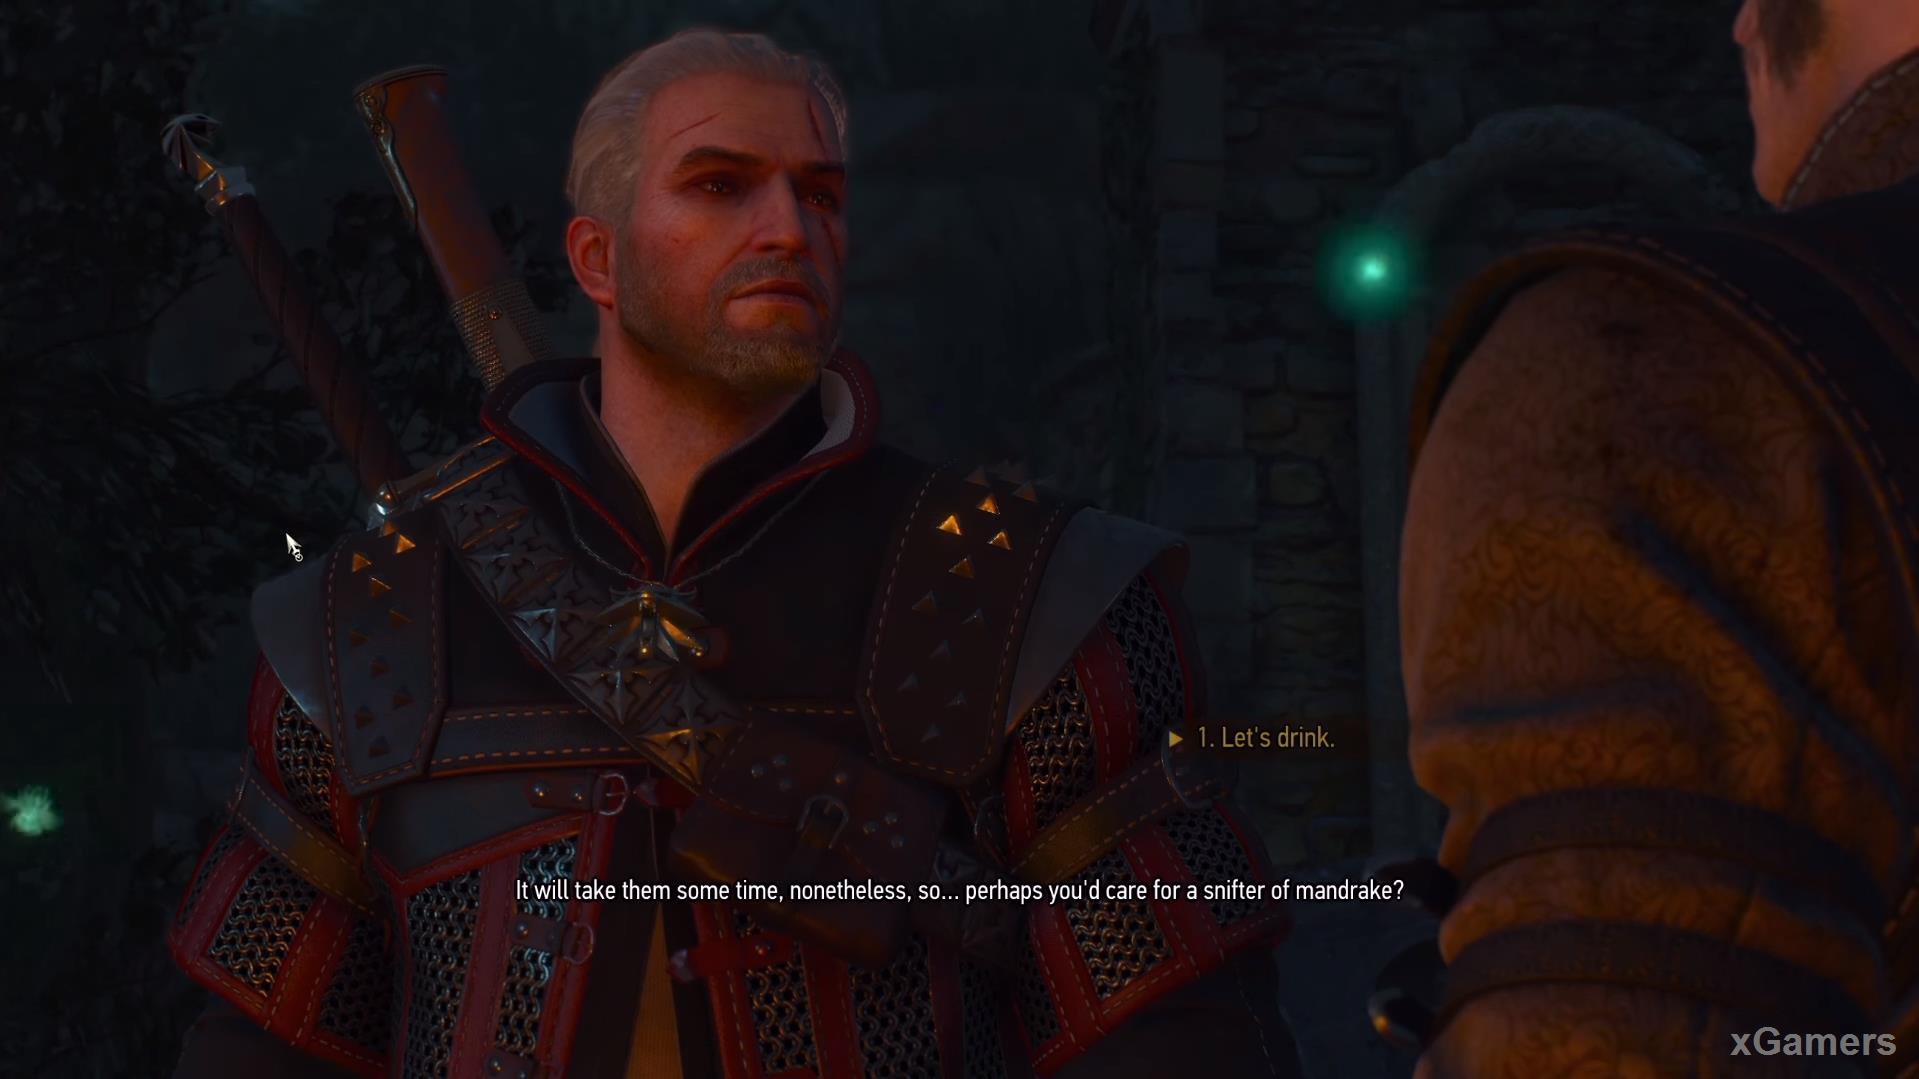 Regis will offer the Witcher a couple of drinks